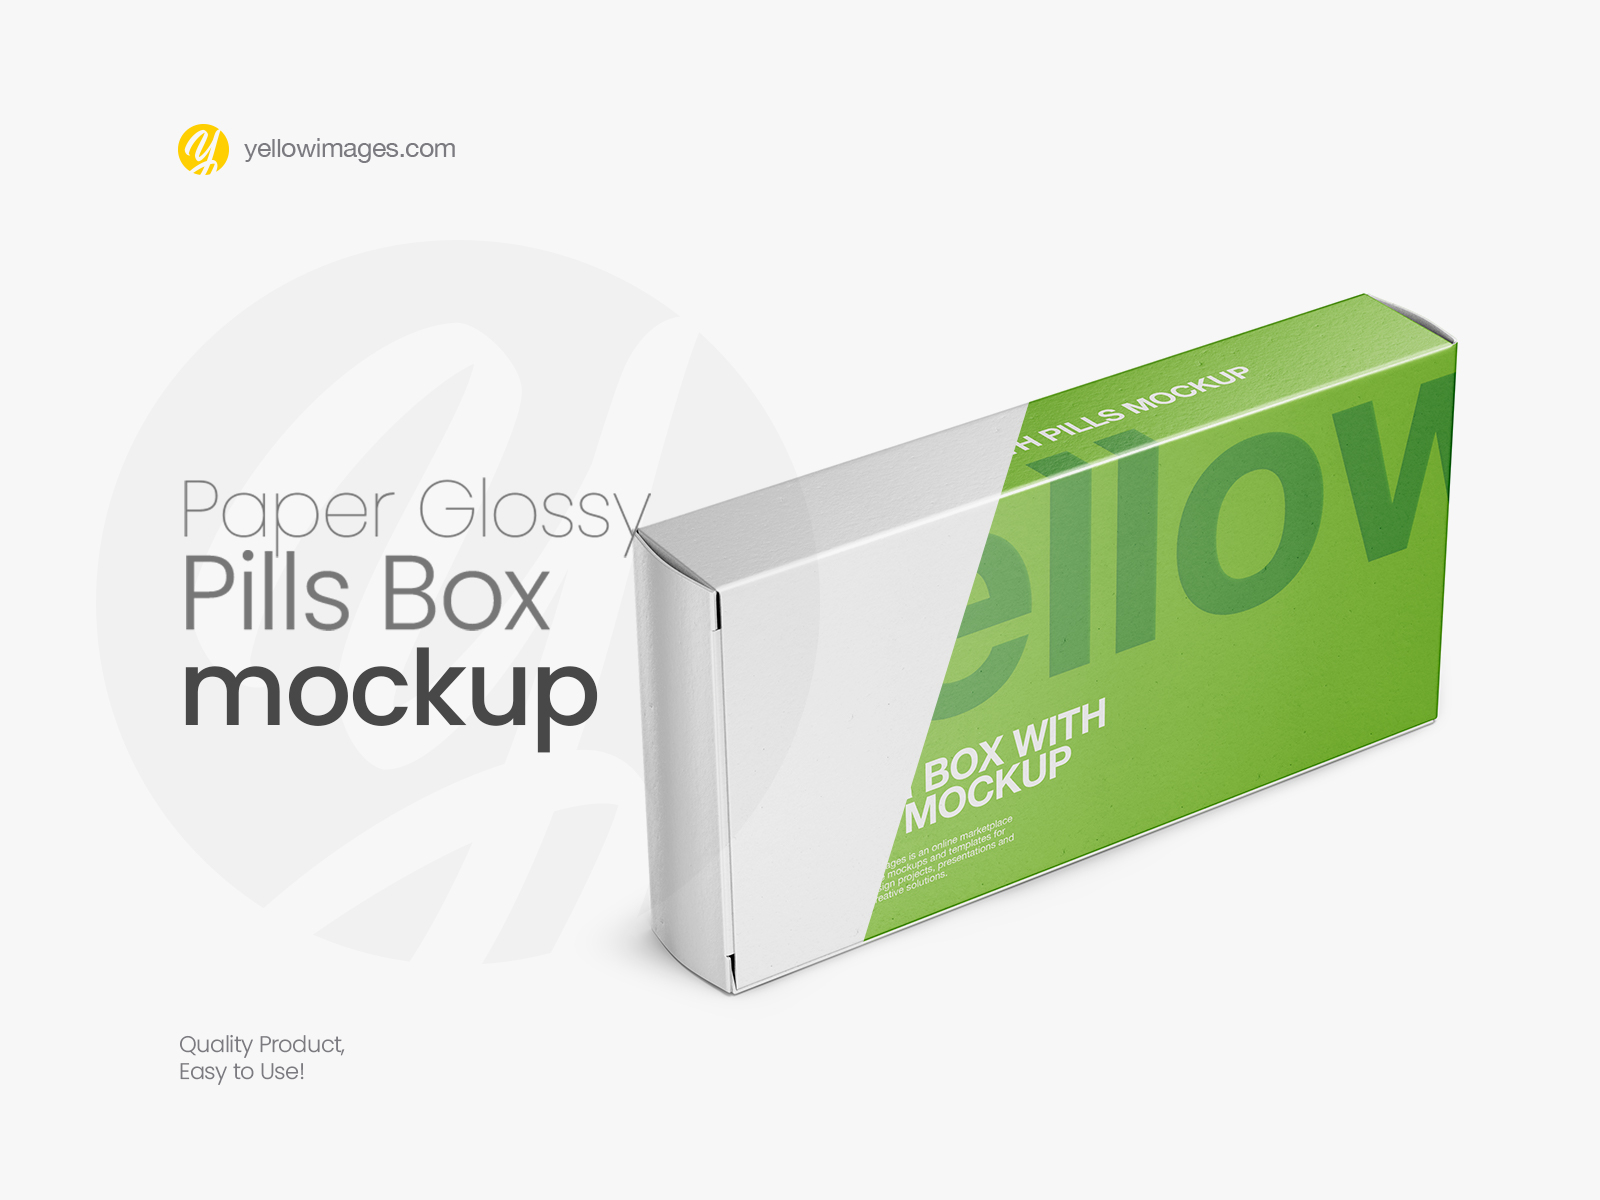 Download Free Bella Canvas Mockup Generator Download Free And Premium Psd Mockup Templates And Design Assets PSD Mockup Template